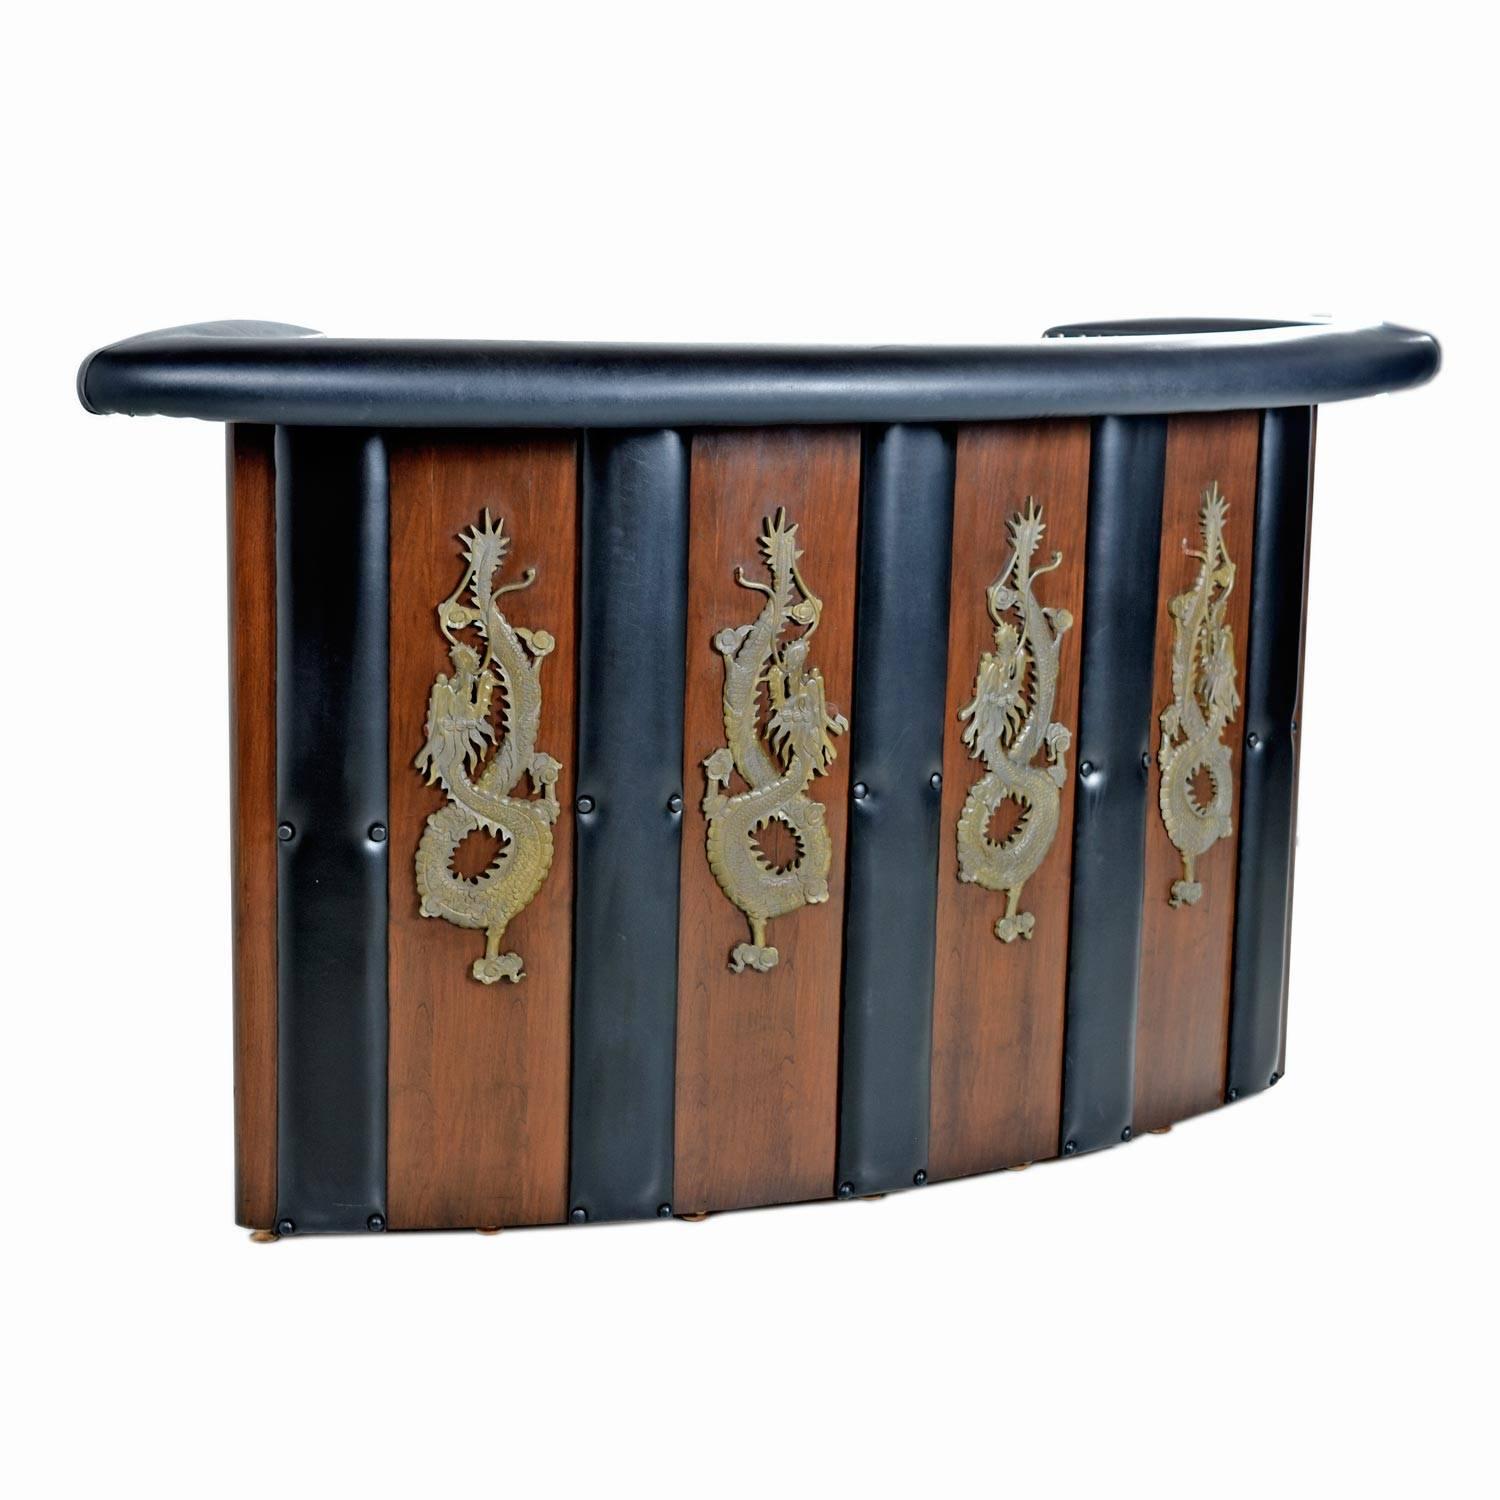 This Asian modern bar is the stuff dreams are made of if you love dragons as much as we do. The tufted vinyl panels on the wood backdrop add a sleek and sophisticated finish while fashionably framing each dragon. The dragons are wood carved though